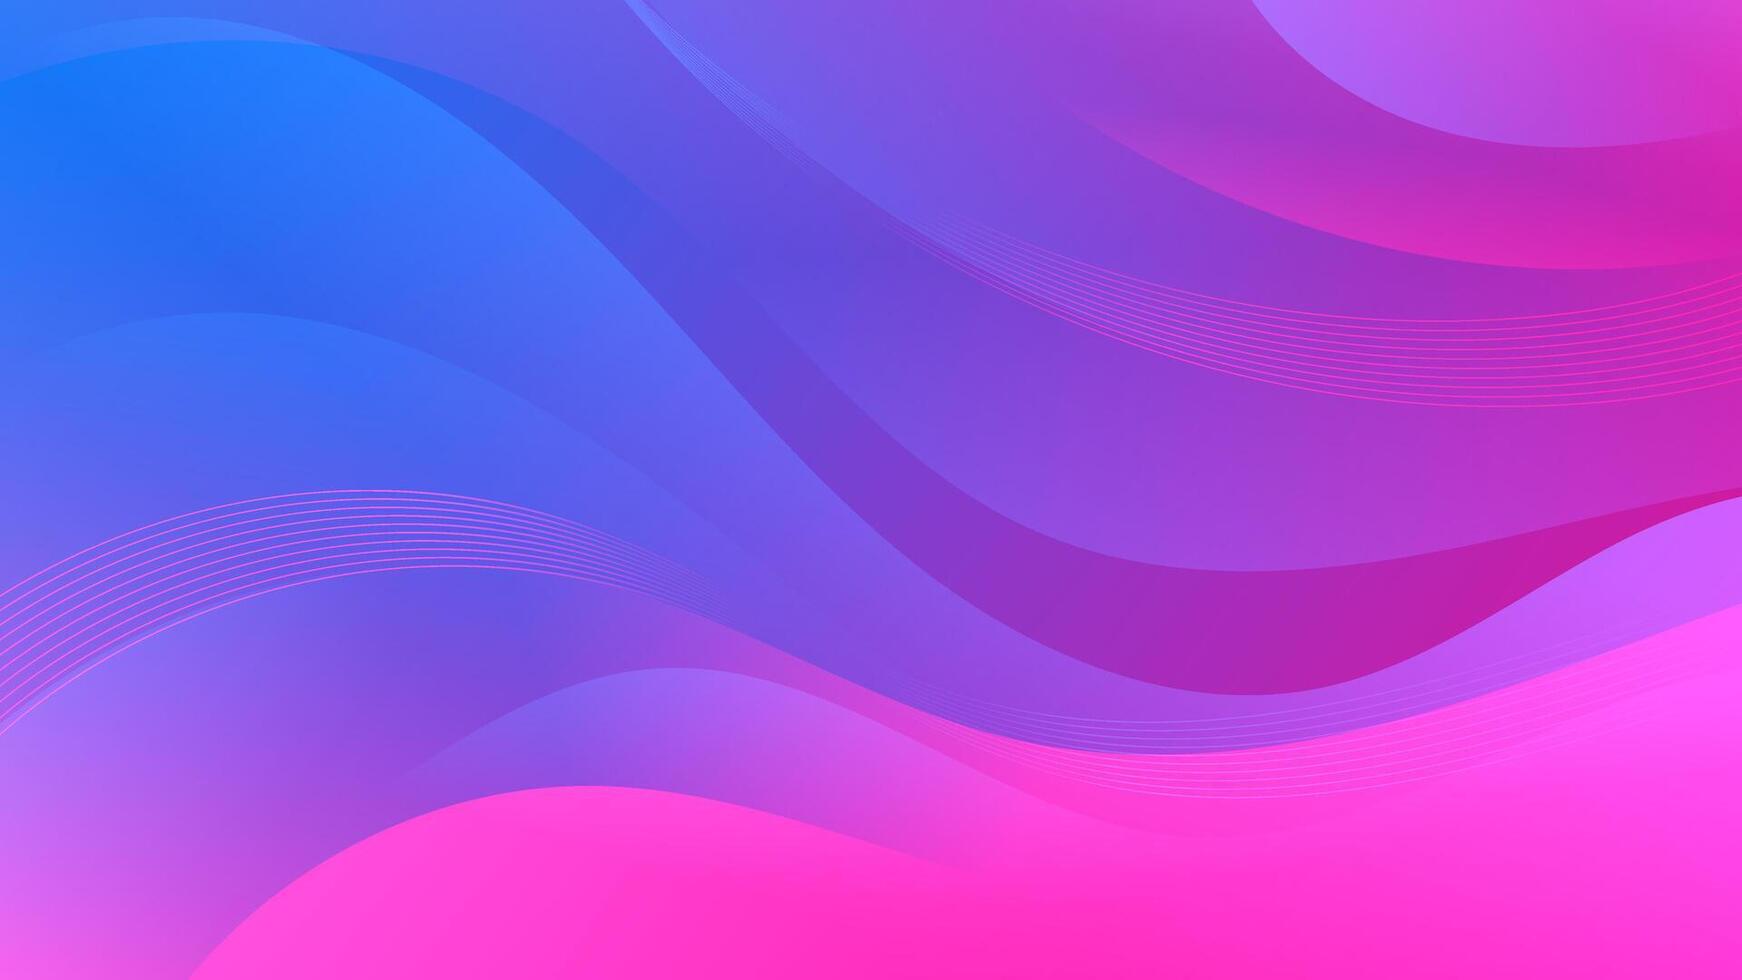 violet blue hues in abstract background with wave pattern. Varied usage for websites, flyers, posters, and digital art vector